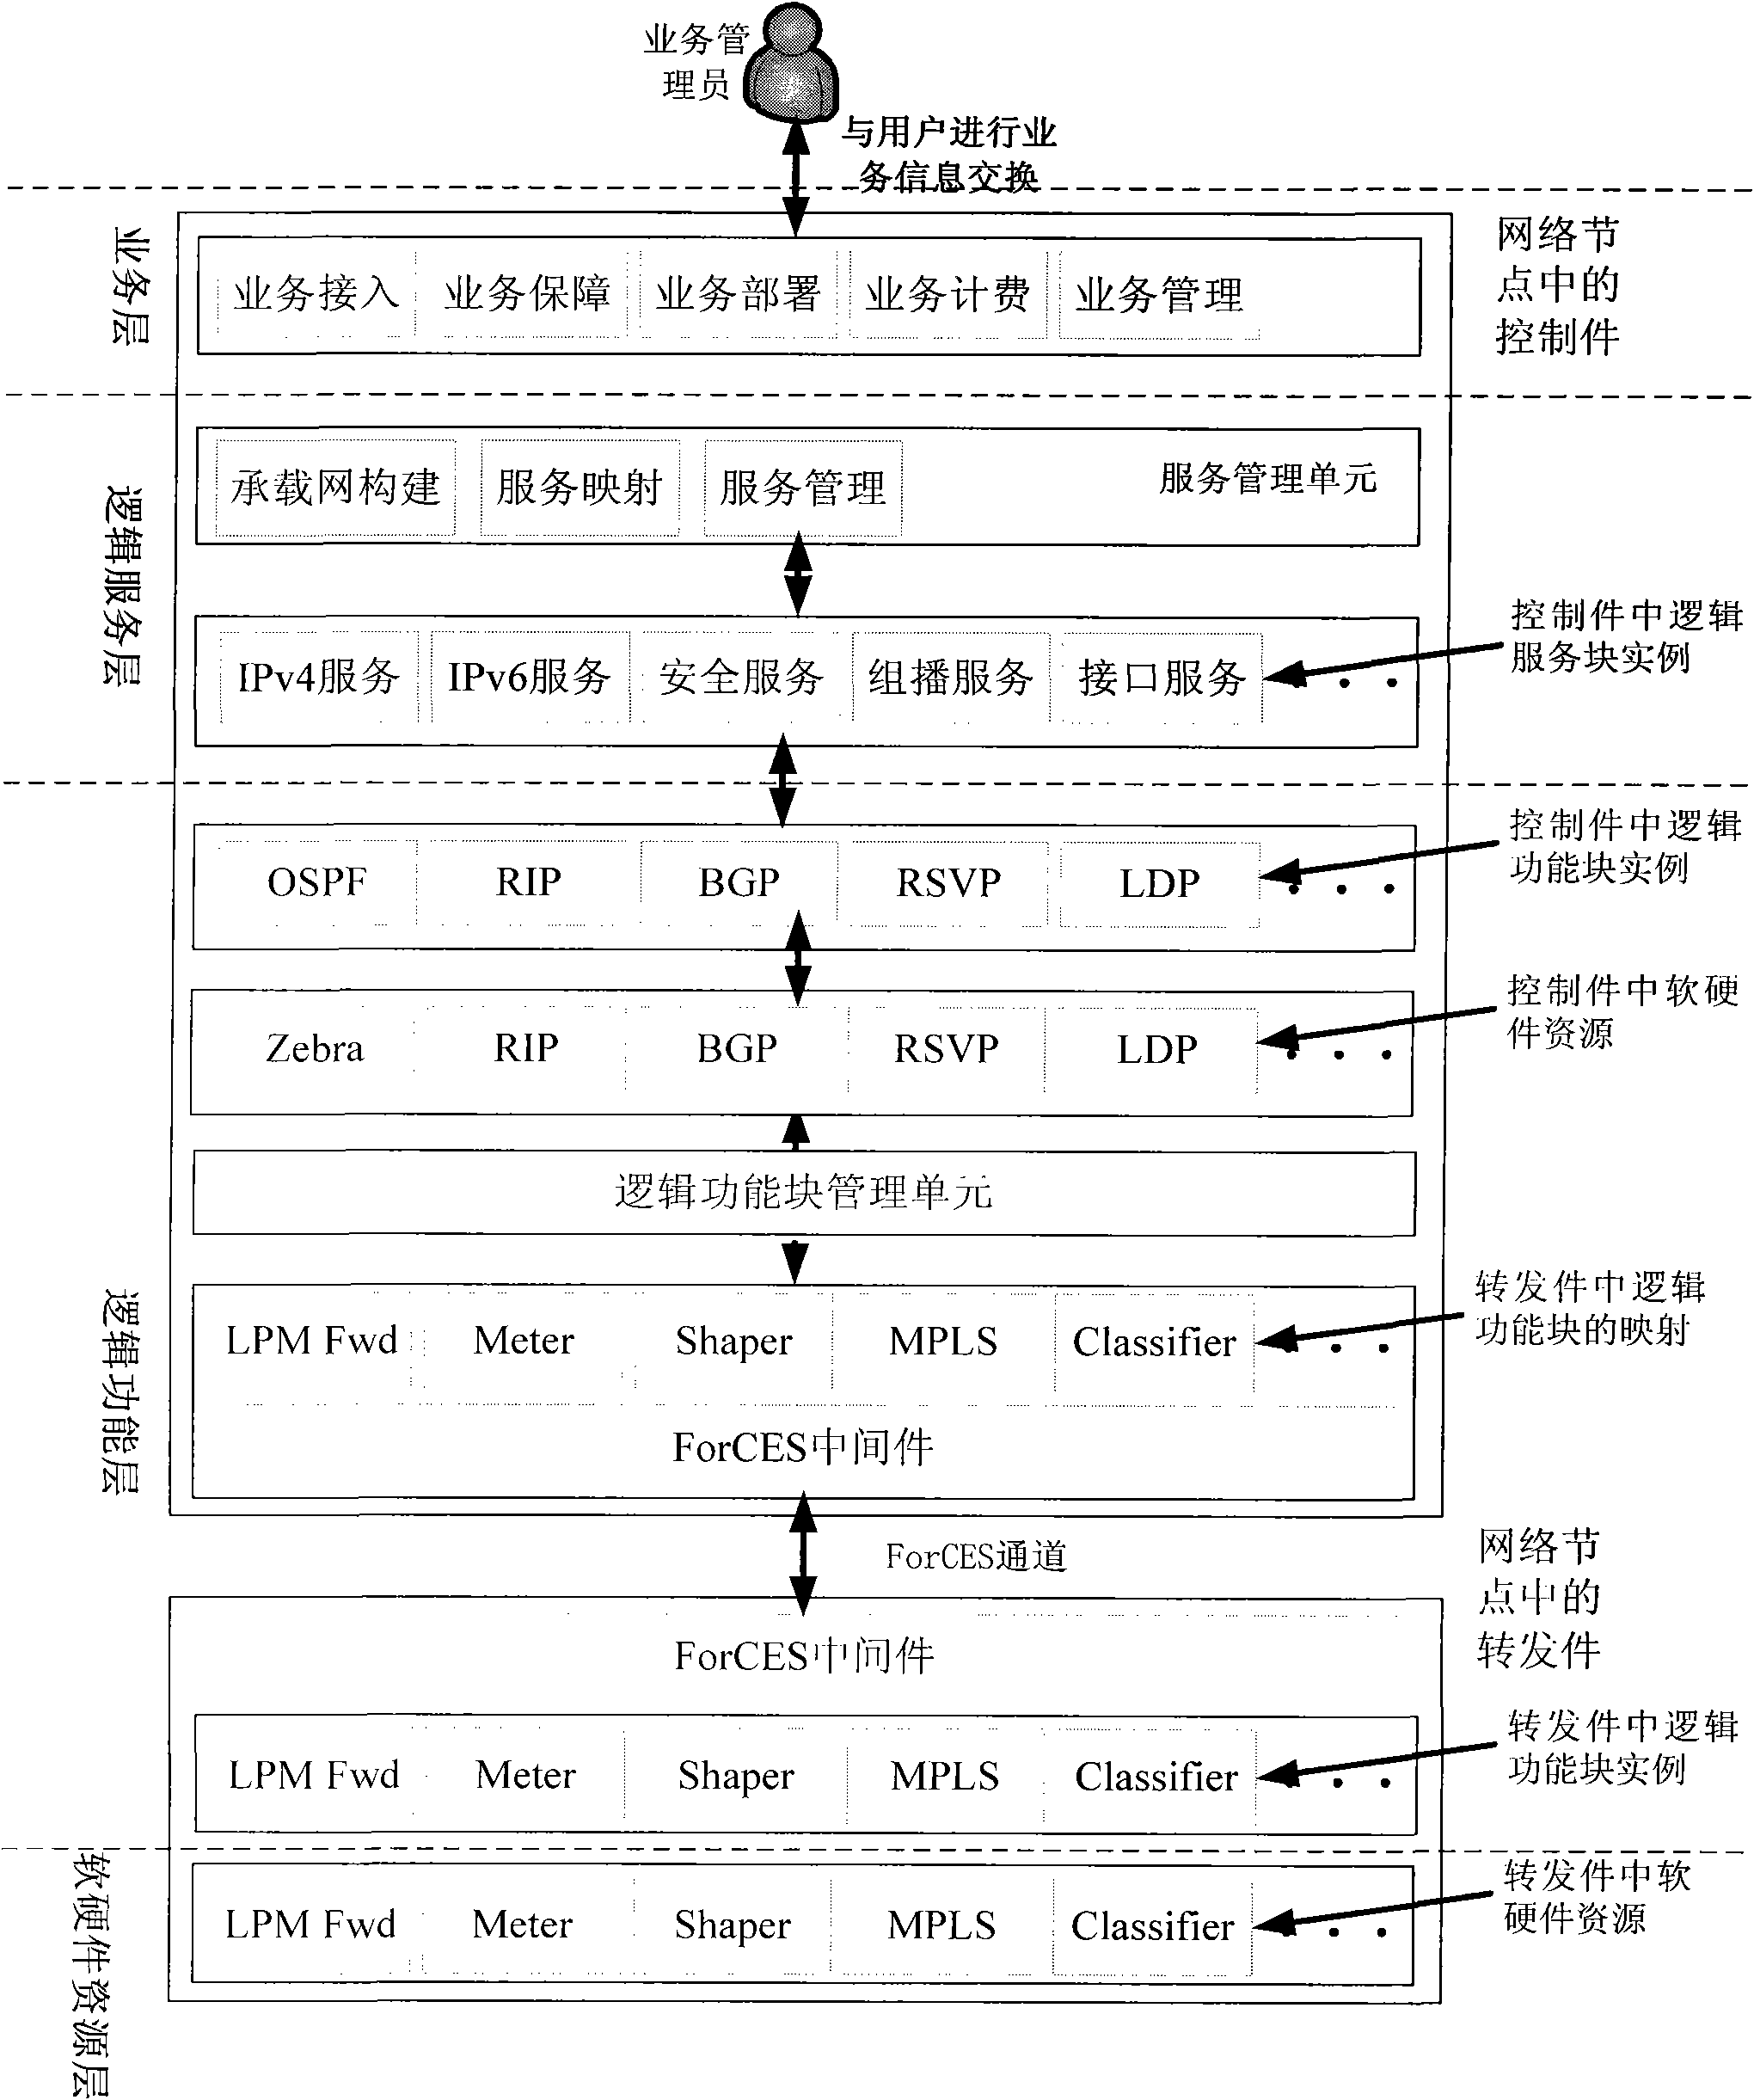 Method for realizing business configuration router based on architecture of transmitting and controlling separate networkware